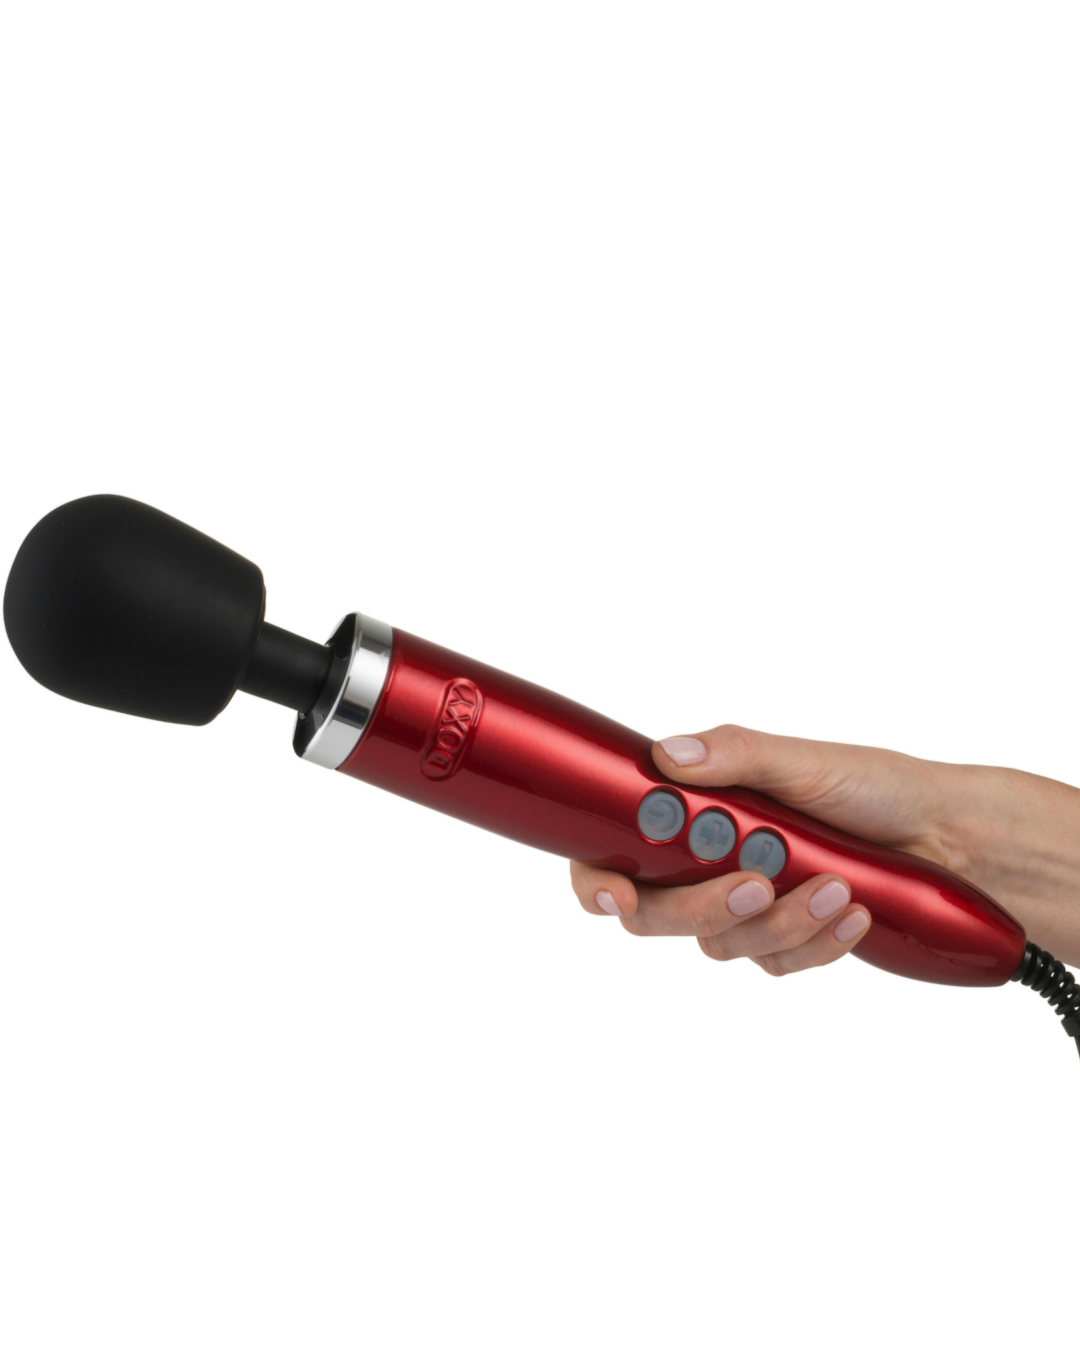 Doxy Die Cast Extra Powerful Massage Wand Vibrator - Red held in model's hand 